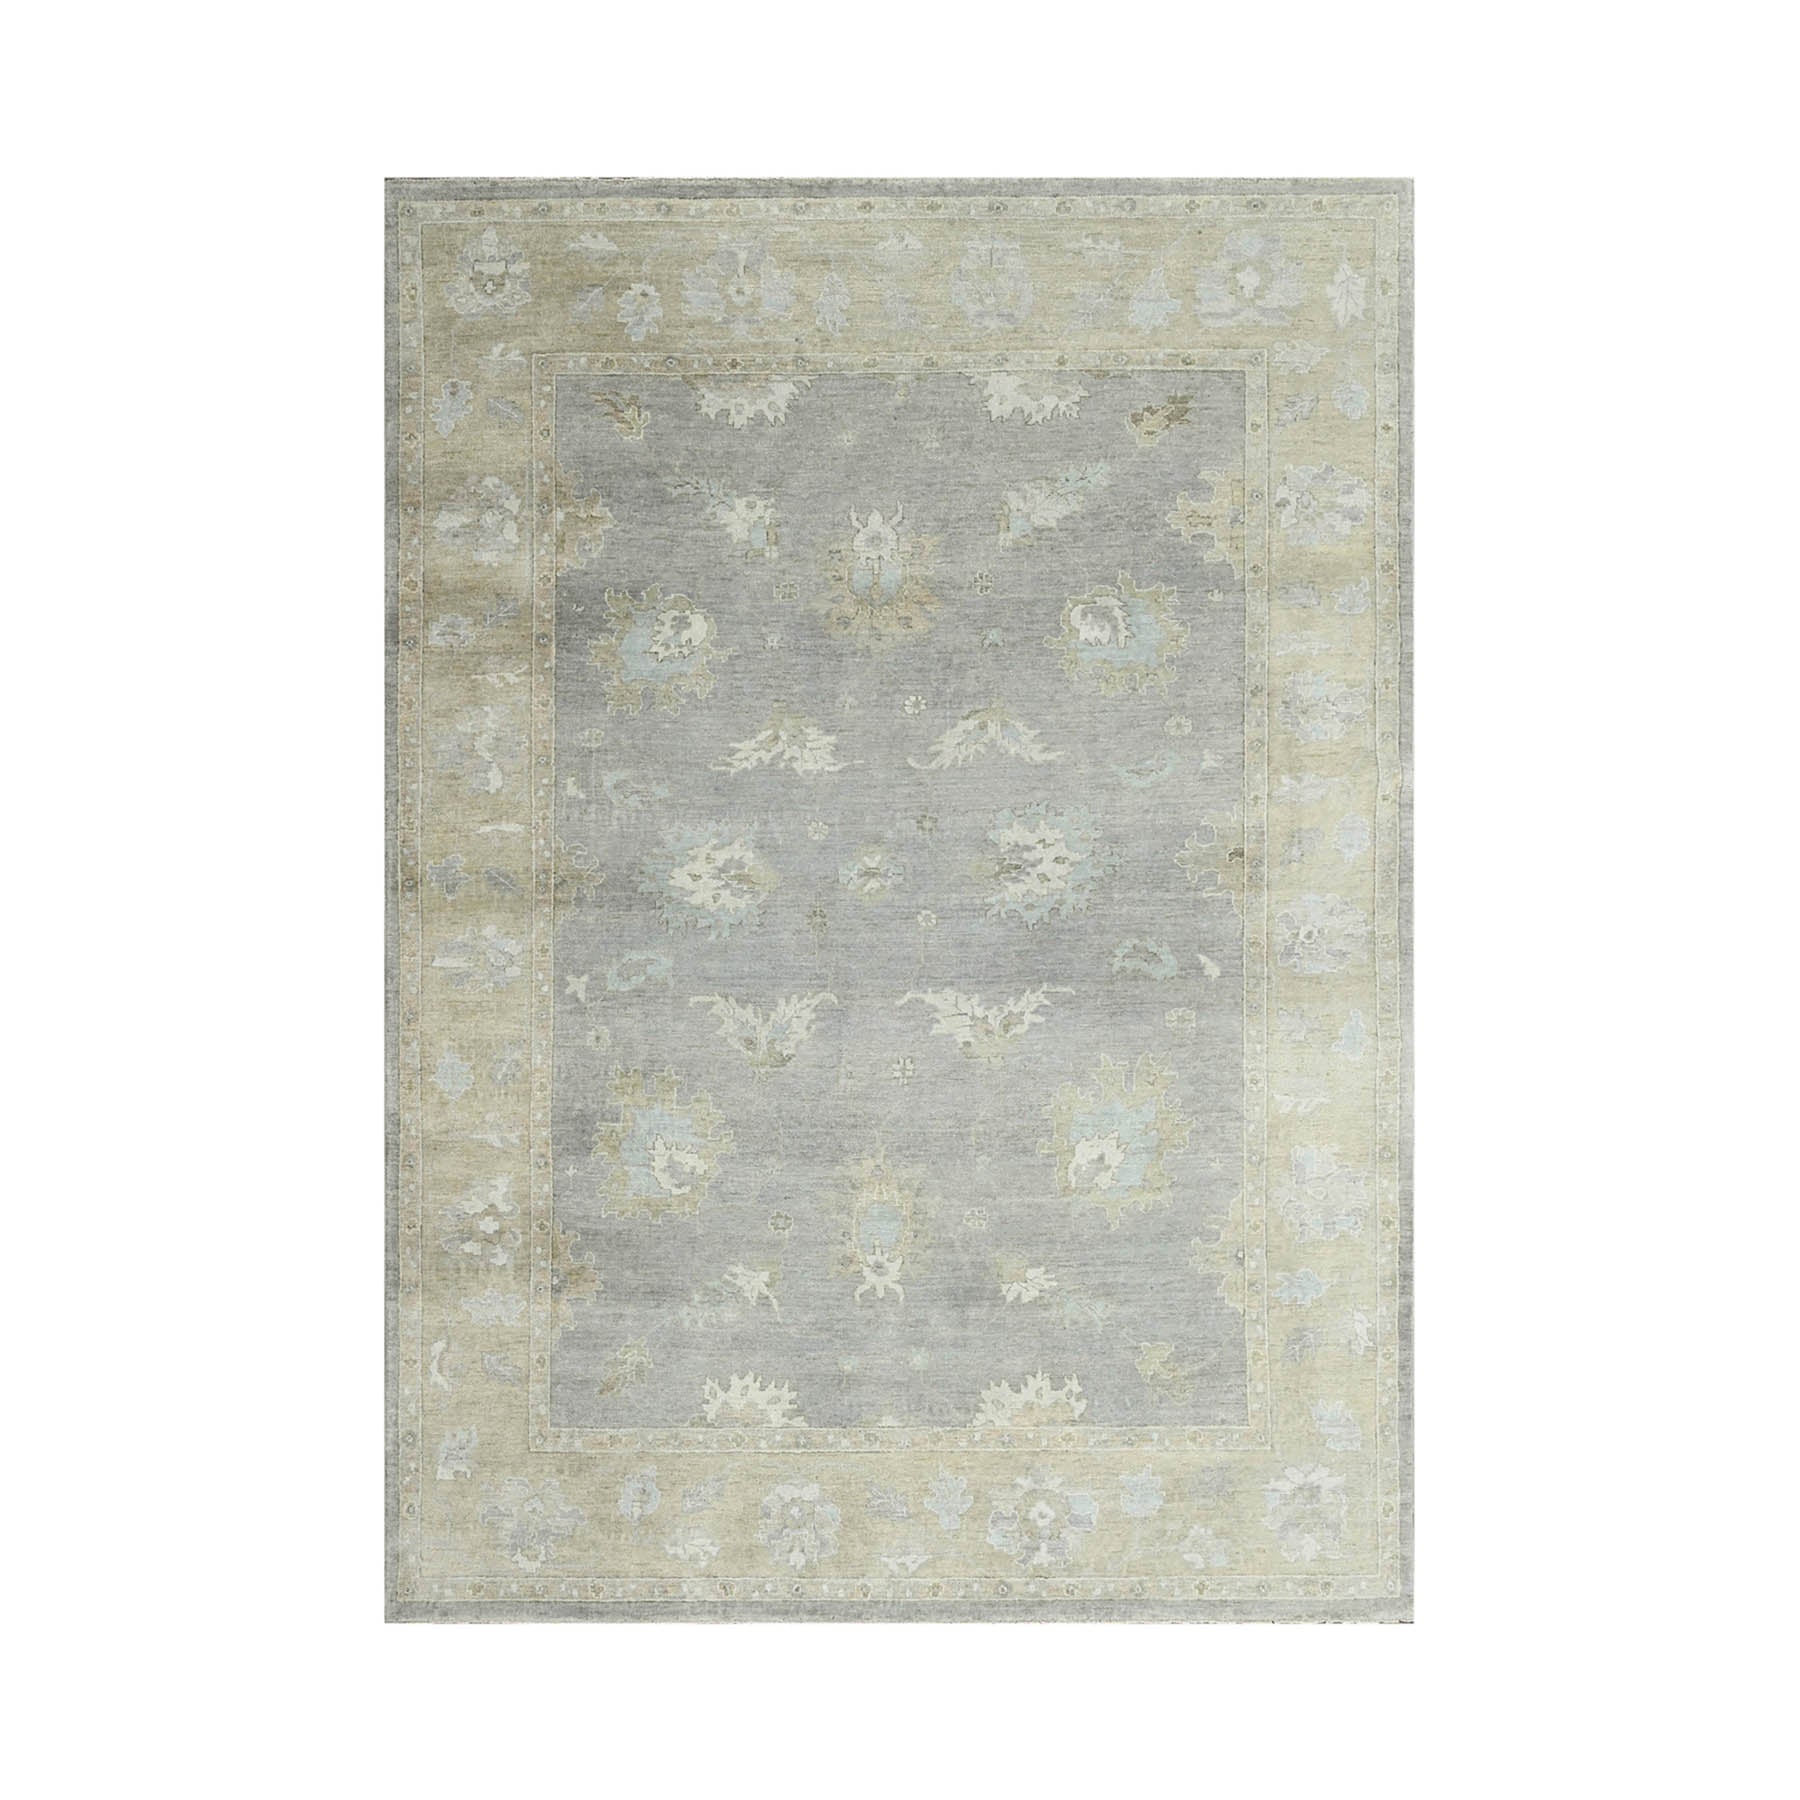 Multi Size Hand Knotted 100% Wool Oushak Traditional Oriental Area Rug Blue, Beige Color